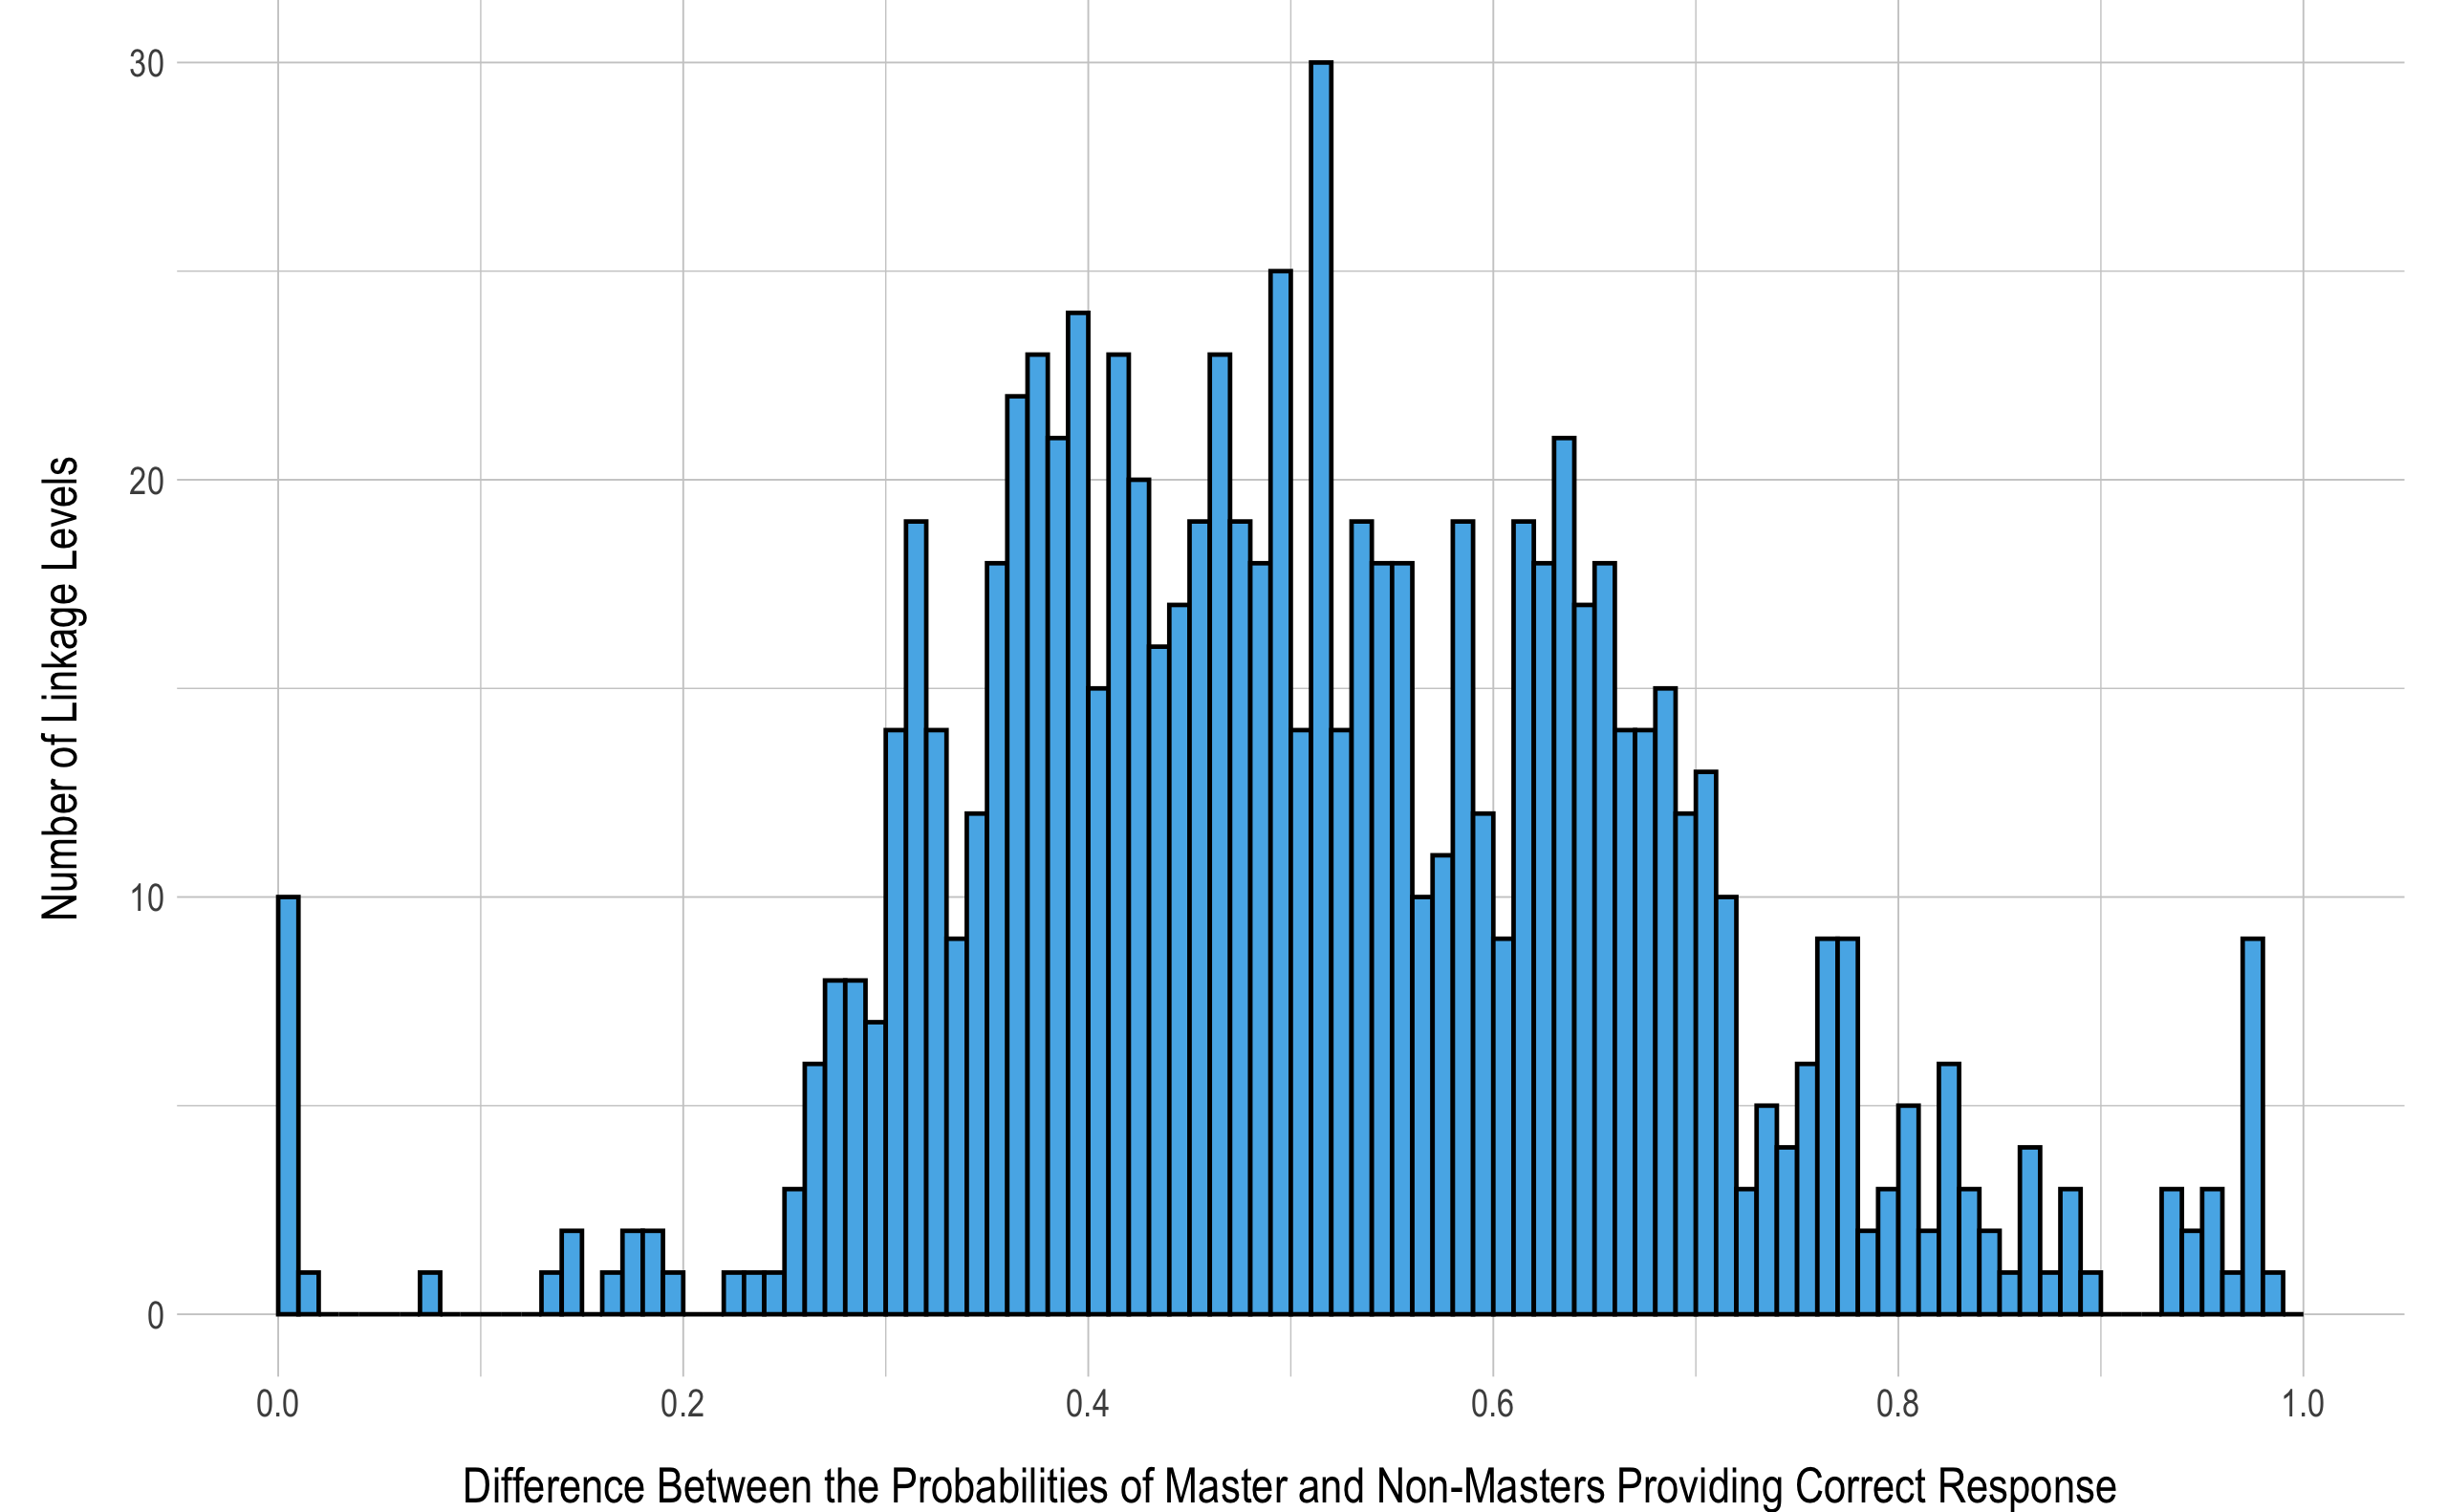 Difference Between Masters’ and Non-masters’ Probability of Providing a Correct Response to Items Measuring Each Linkage Level